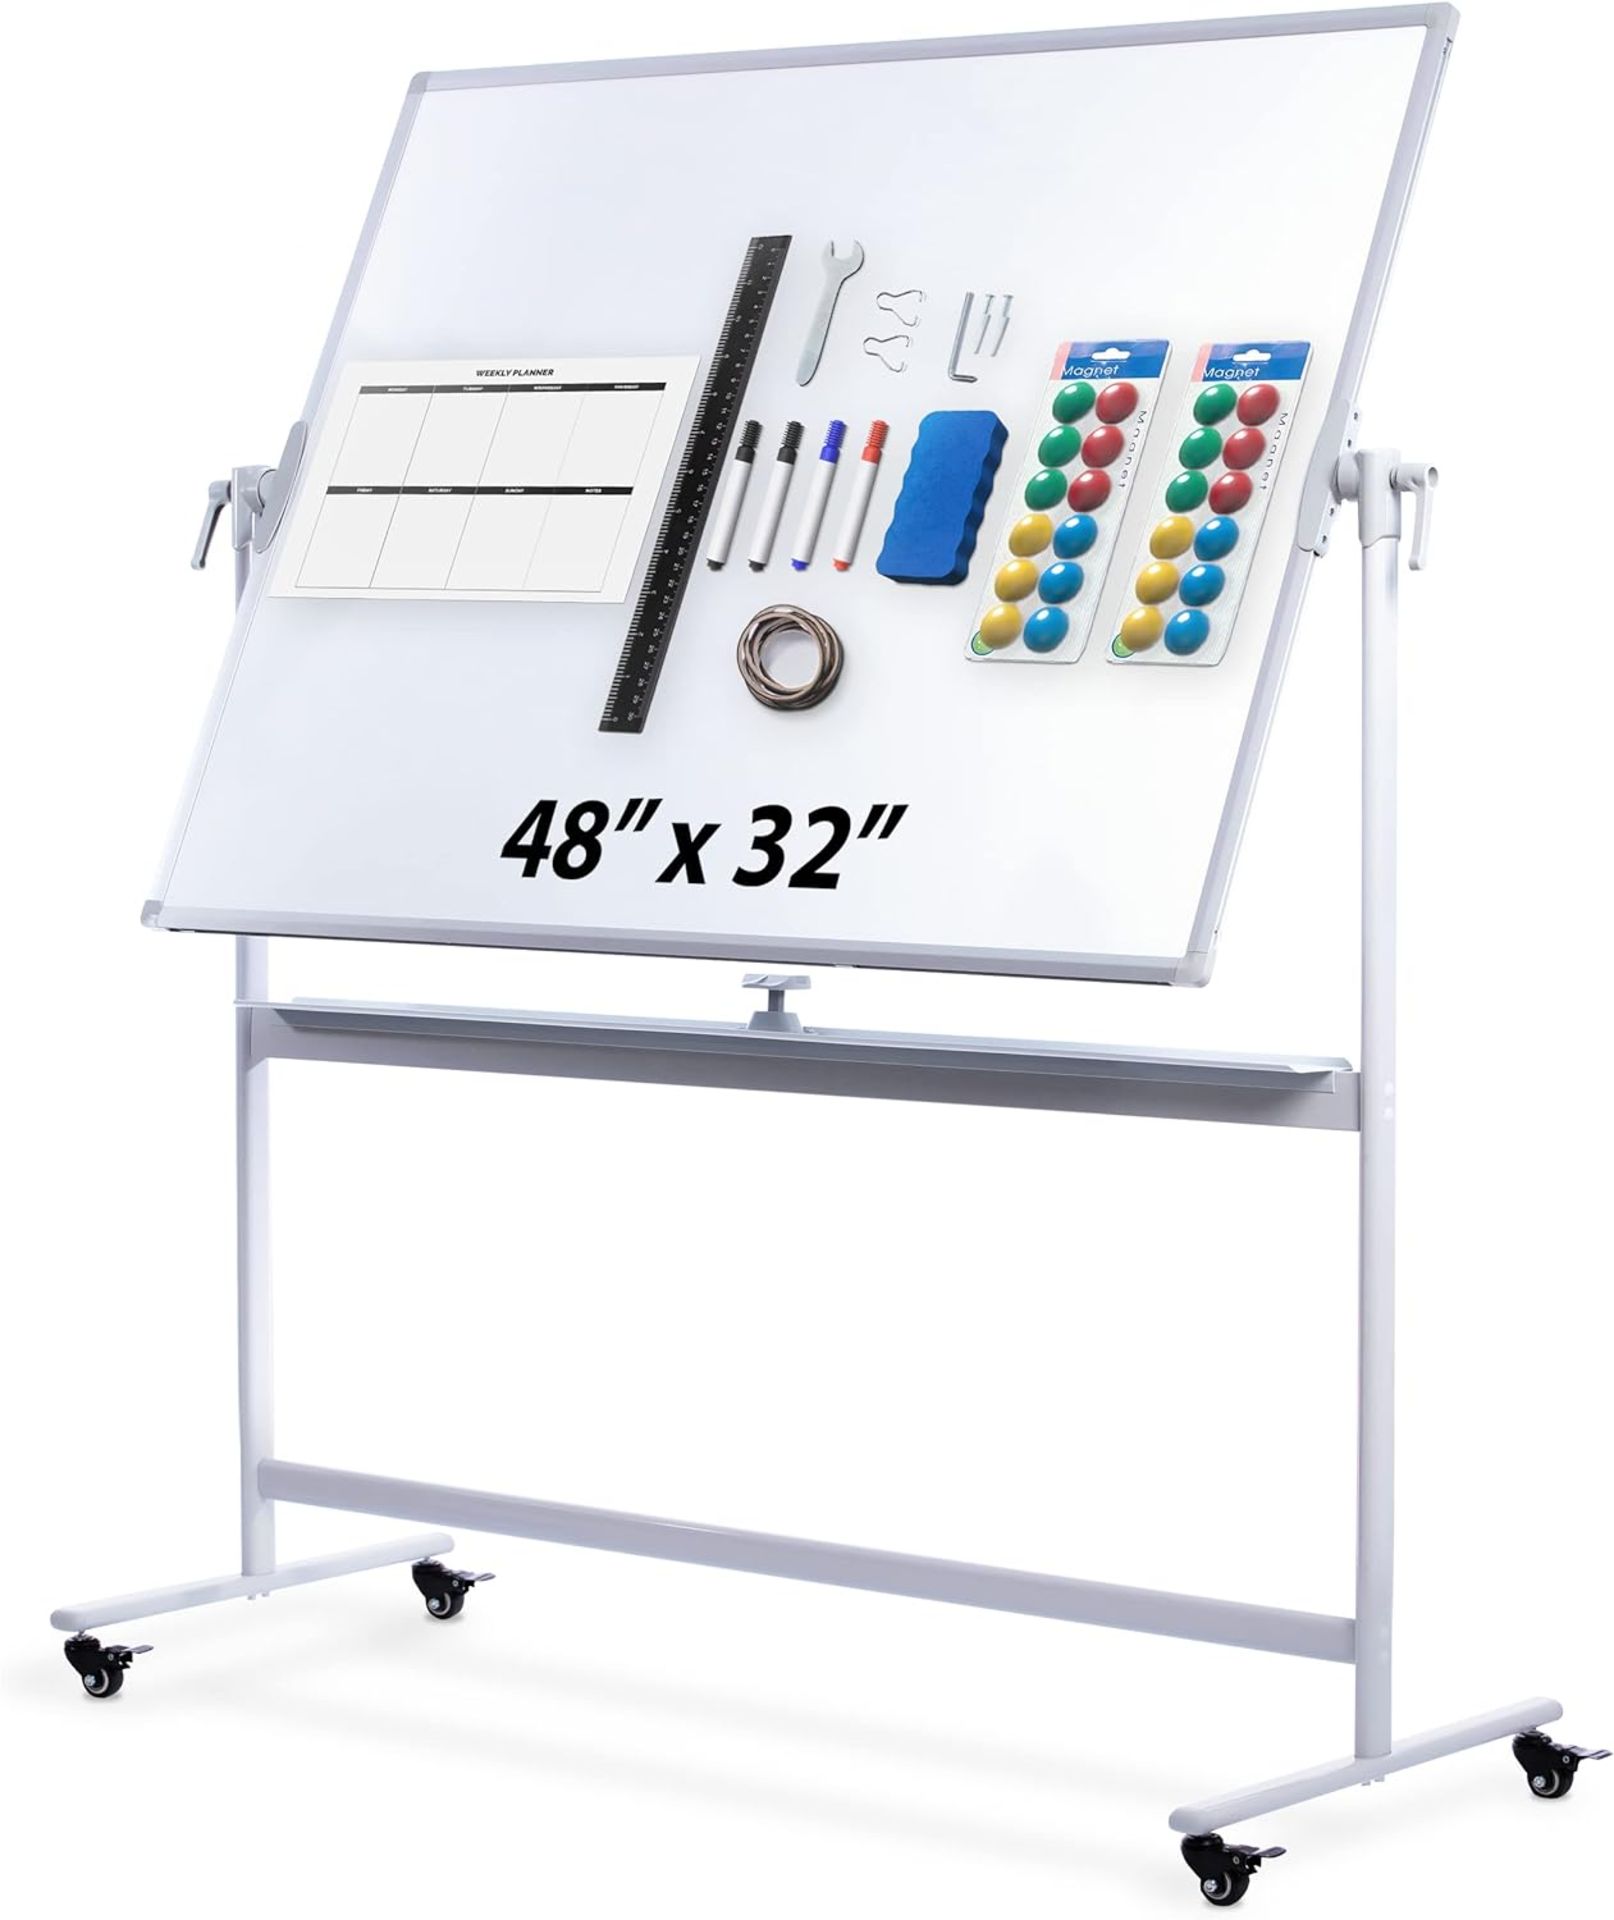 Pallet of Magnetic Whiteboard With Stand - Image 3 of 3